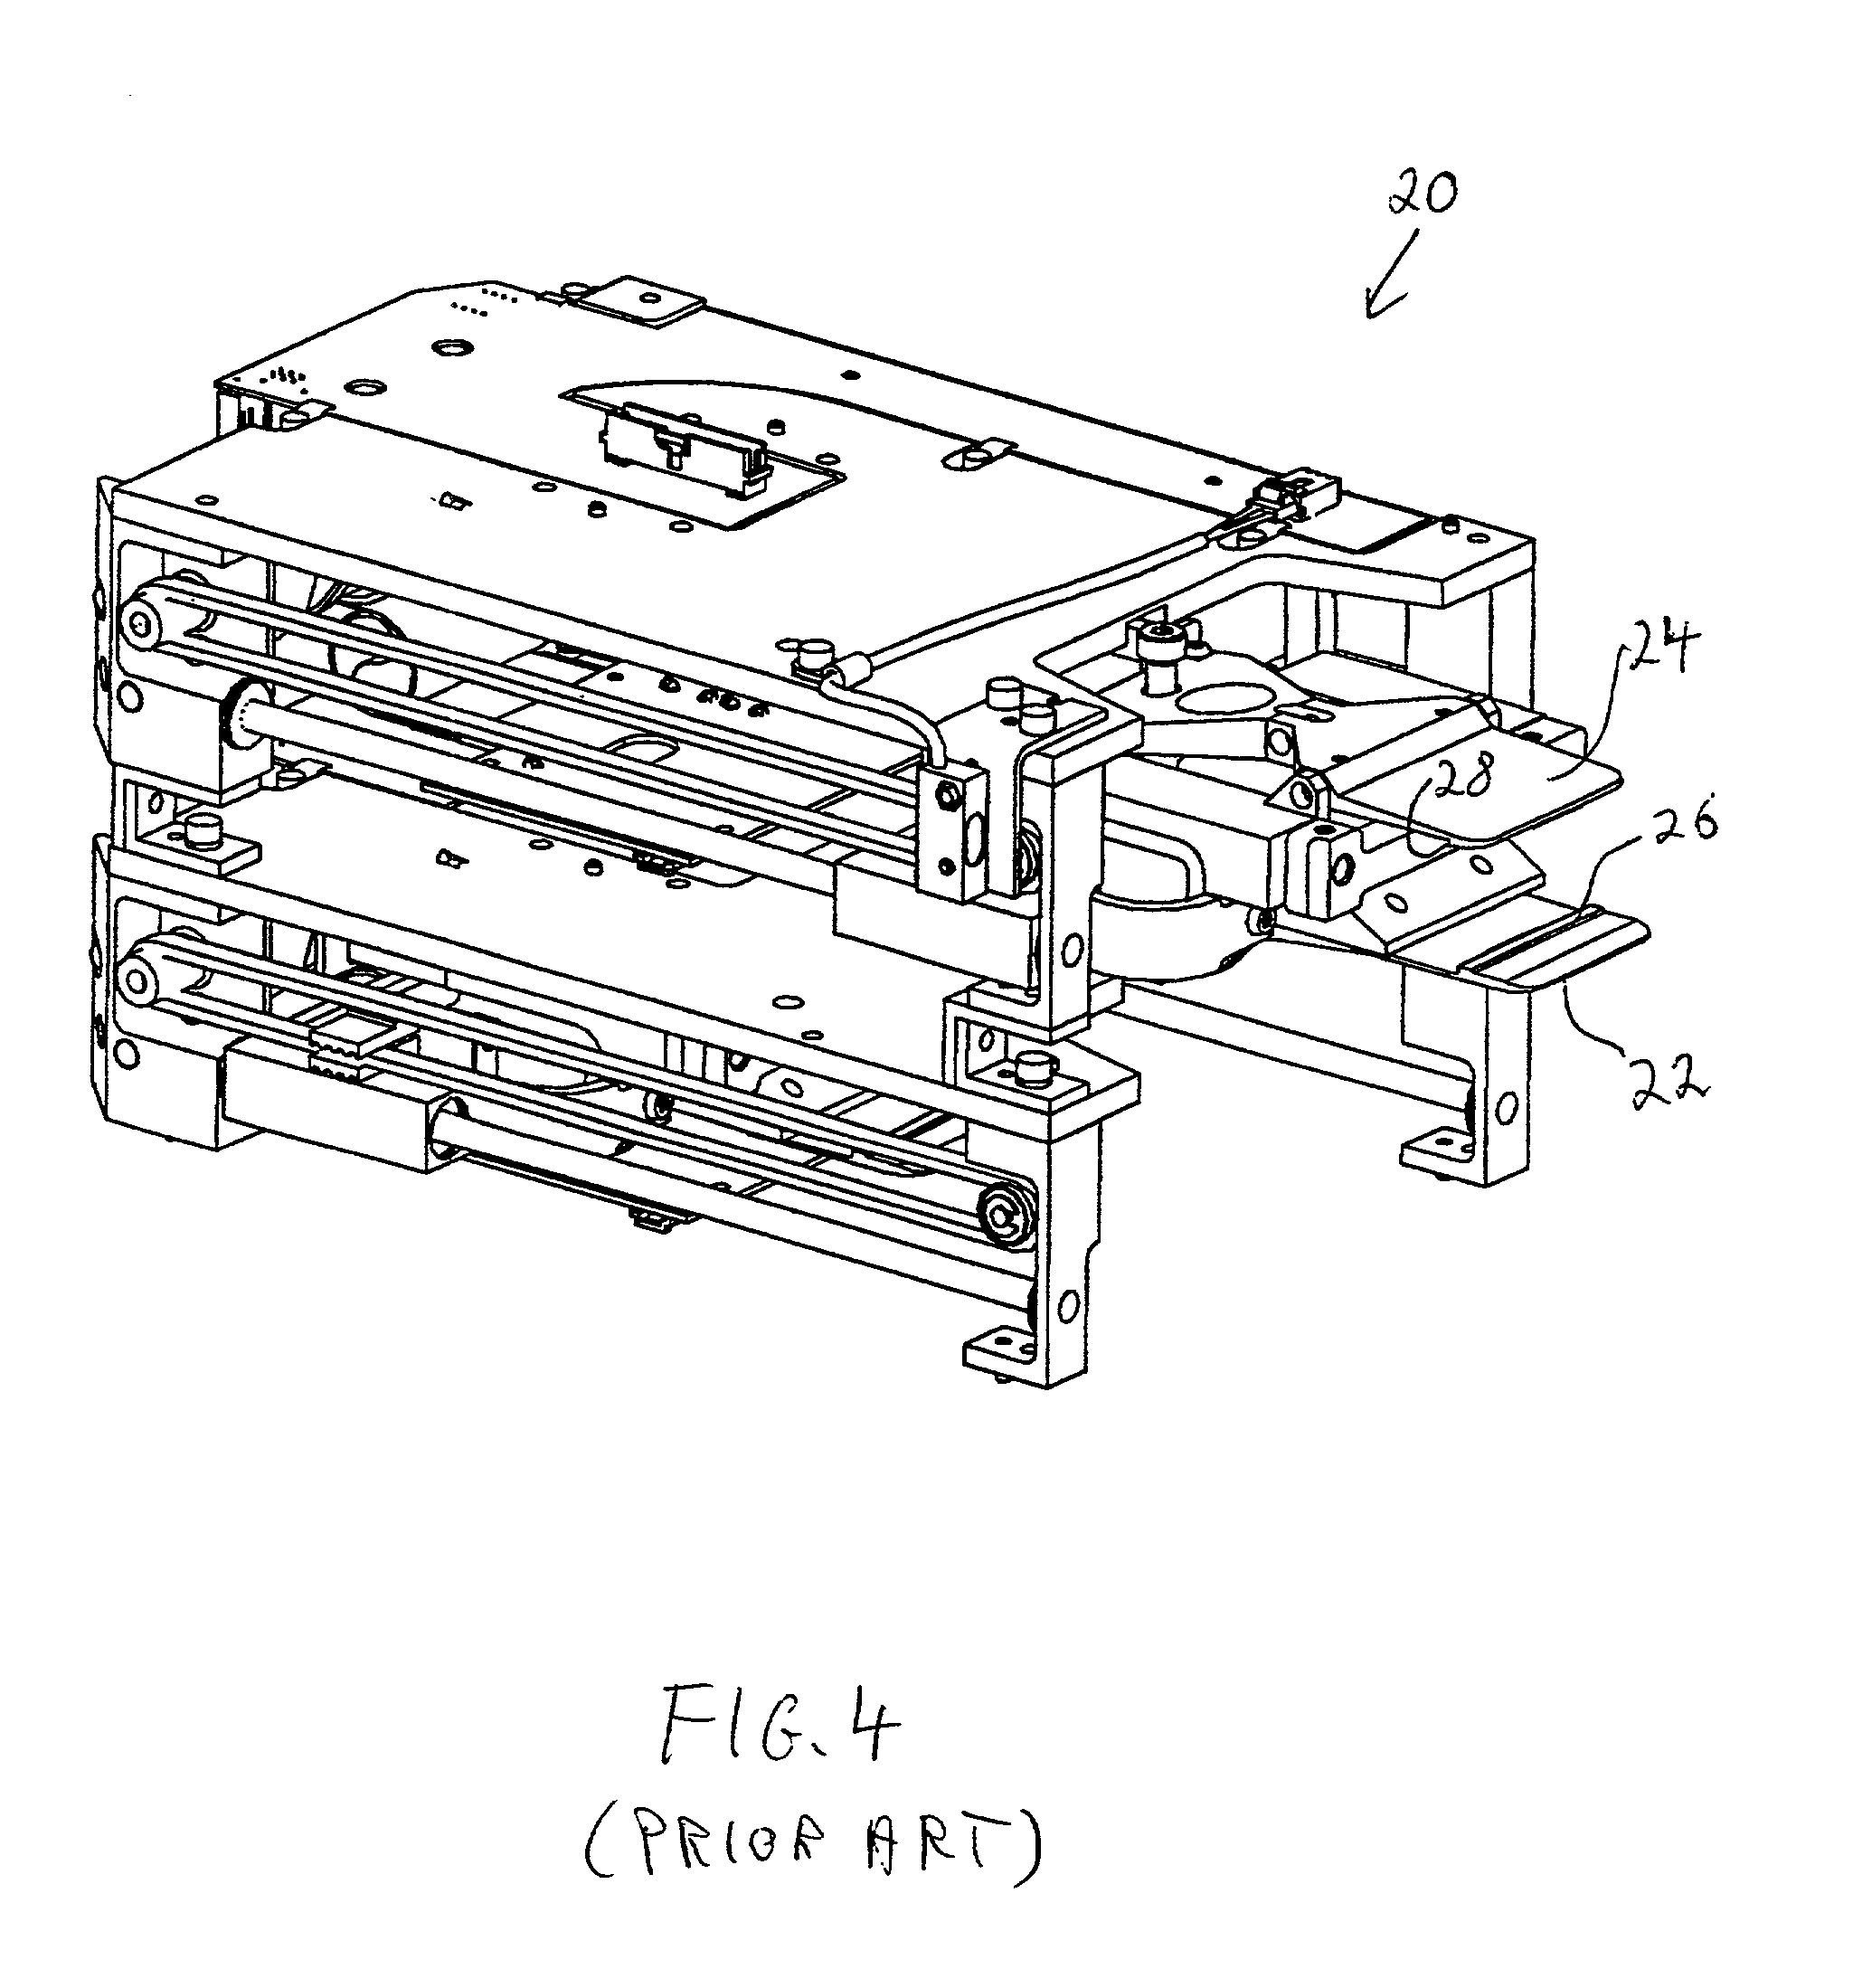 Data-cartridge case adapted for dual-format applications